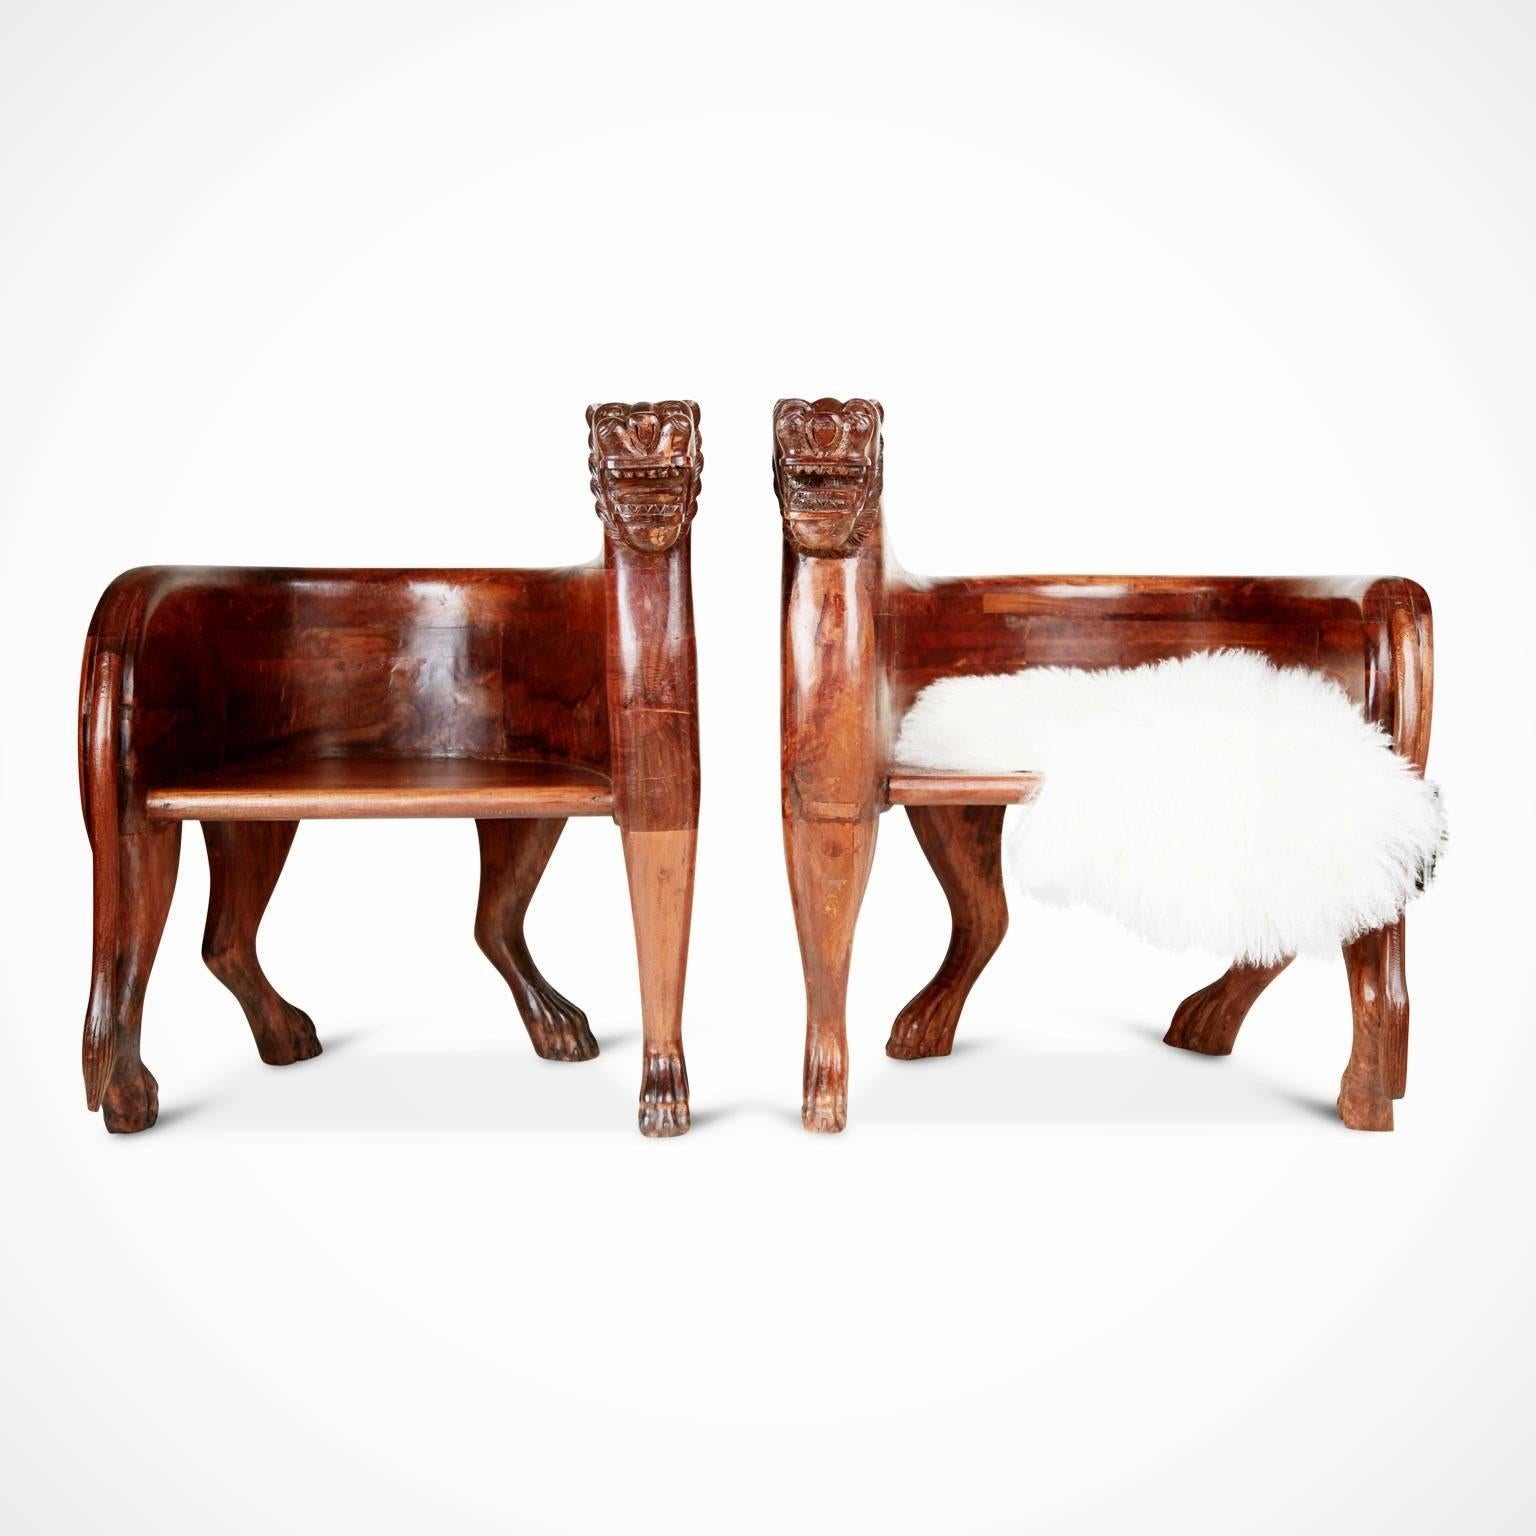 A spectacular and unique find, this pair of figural carved teak Lioness chairs is front-cover-magazine-worthy and can add a bit of the unexpected to any style of room. Consider using at the ends of a long dining table, in a living room or den, next